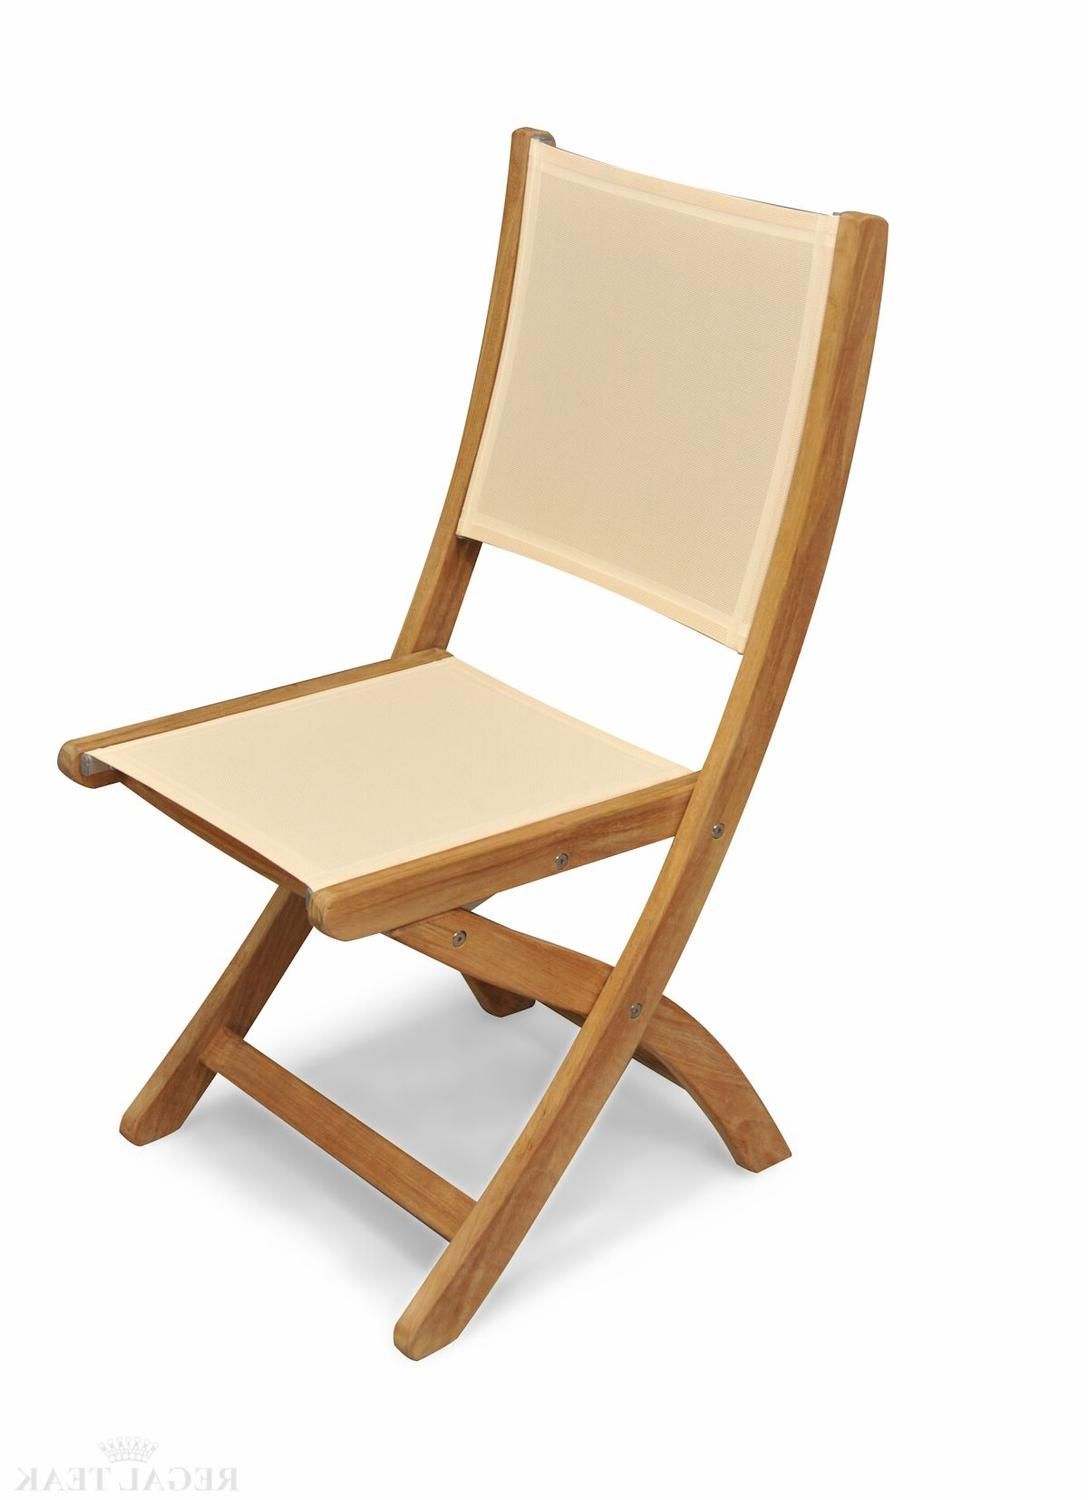 Natural Outdoor Dining Chairs Throughout Favorite Set Of 2 Natural Teak Outdoor Patio Folding Dining Chairs With Cream (View 7 of 15)